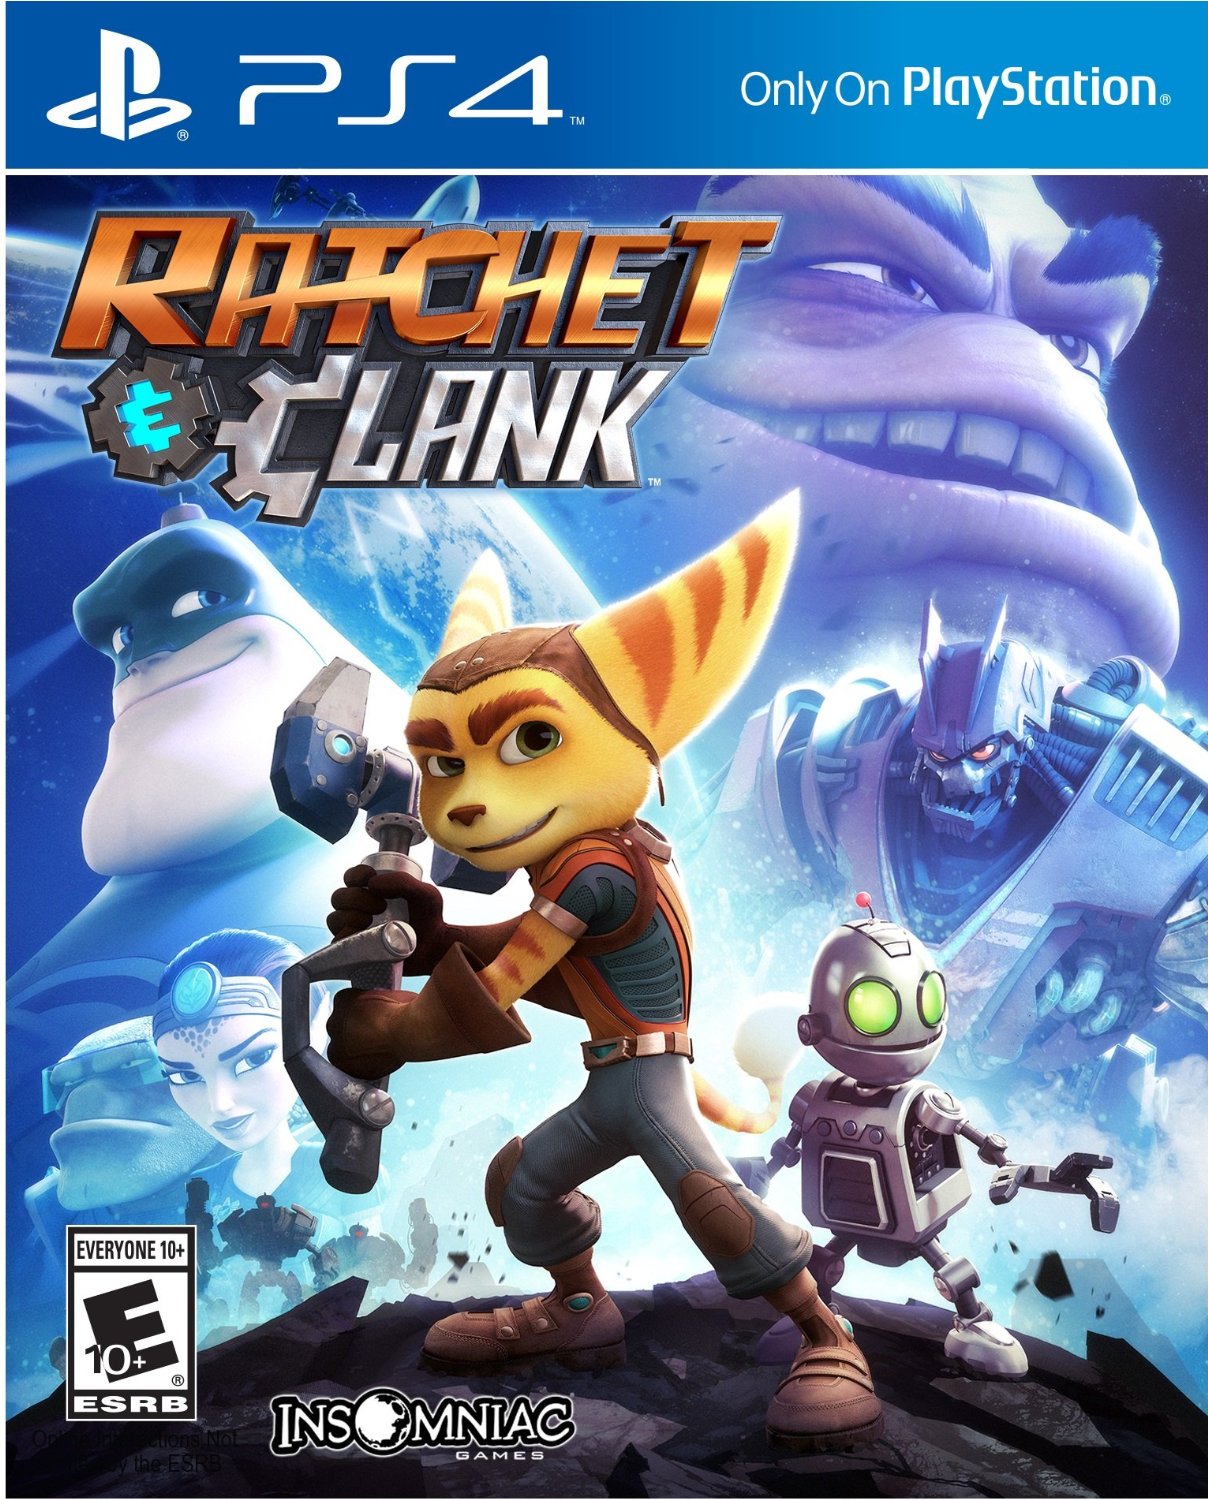 Ratchet and Clank -Game Cover (PlayStation 4) - Photo Credit: Sony via Amazon.com